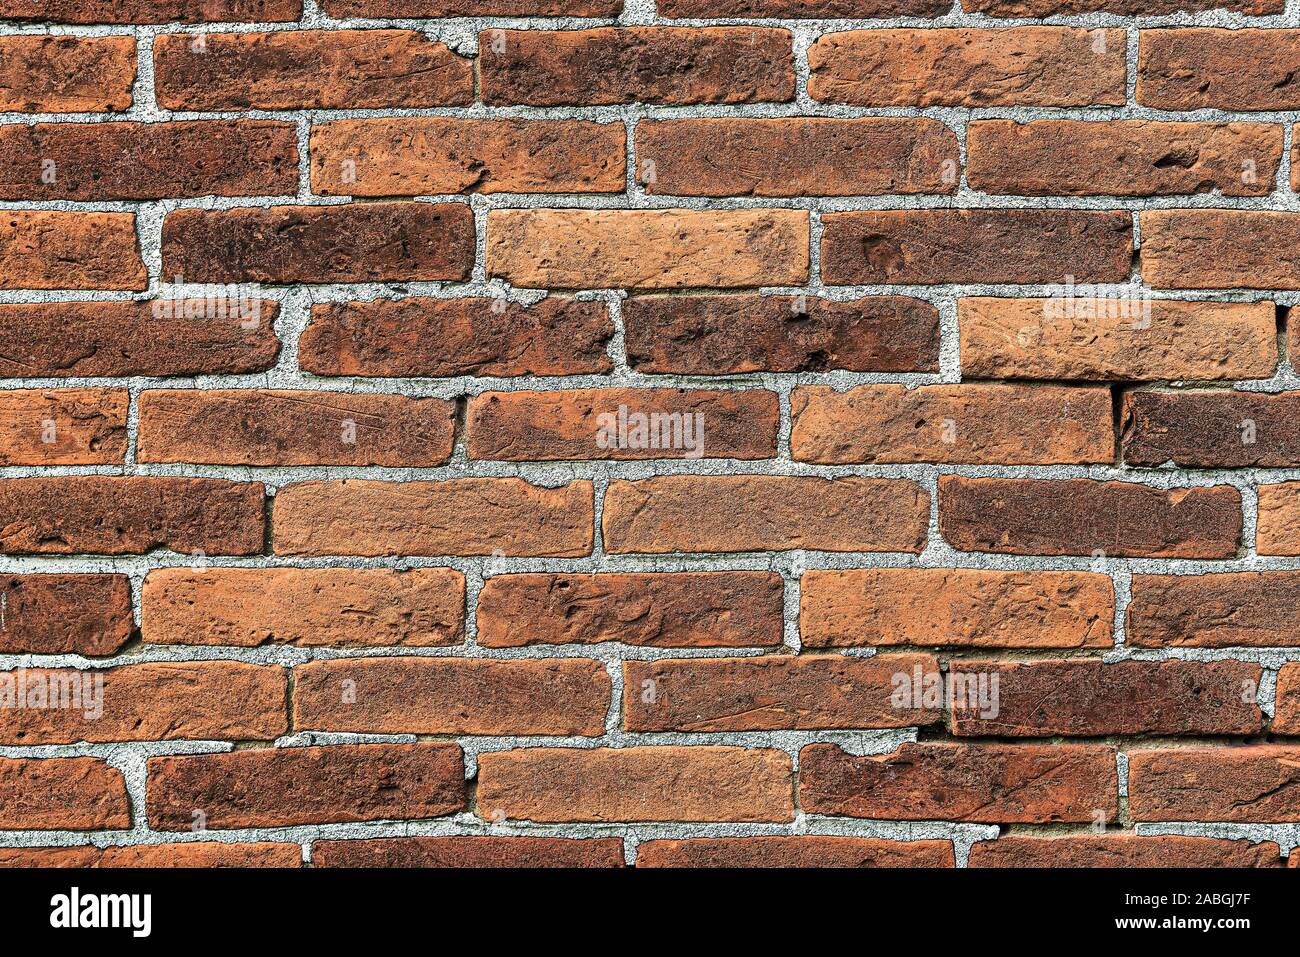 full-frame close-up of old brick stone wall background. Stock Photo